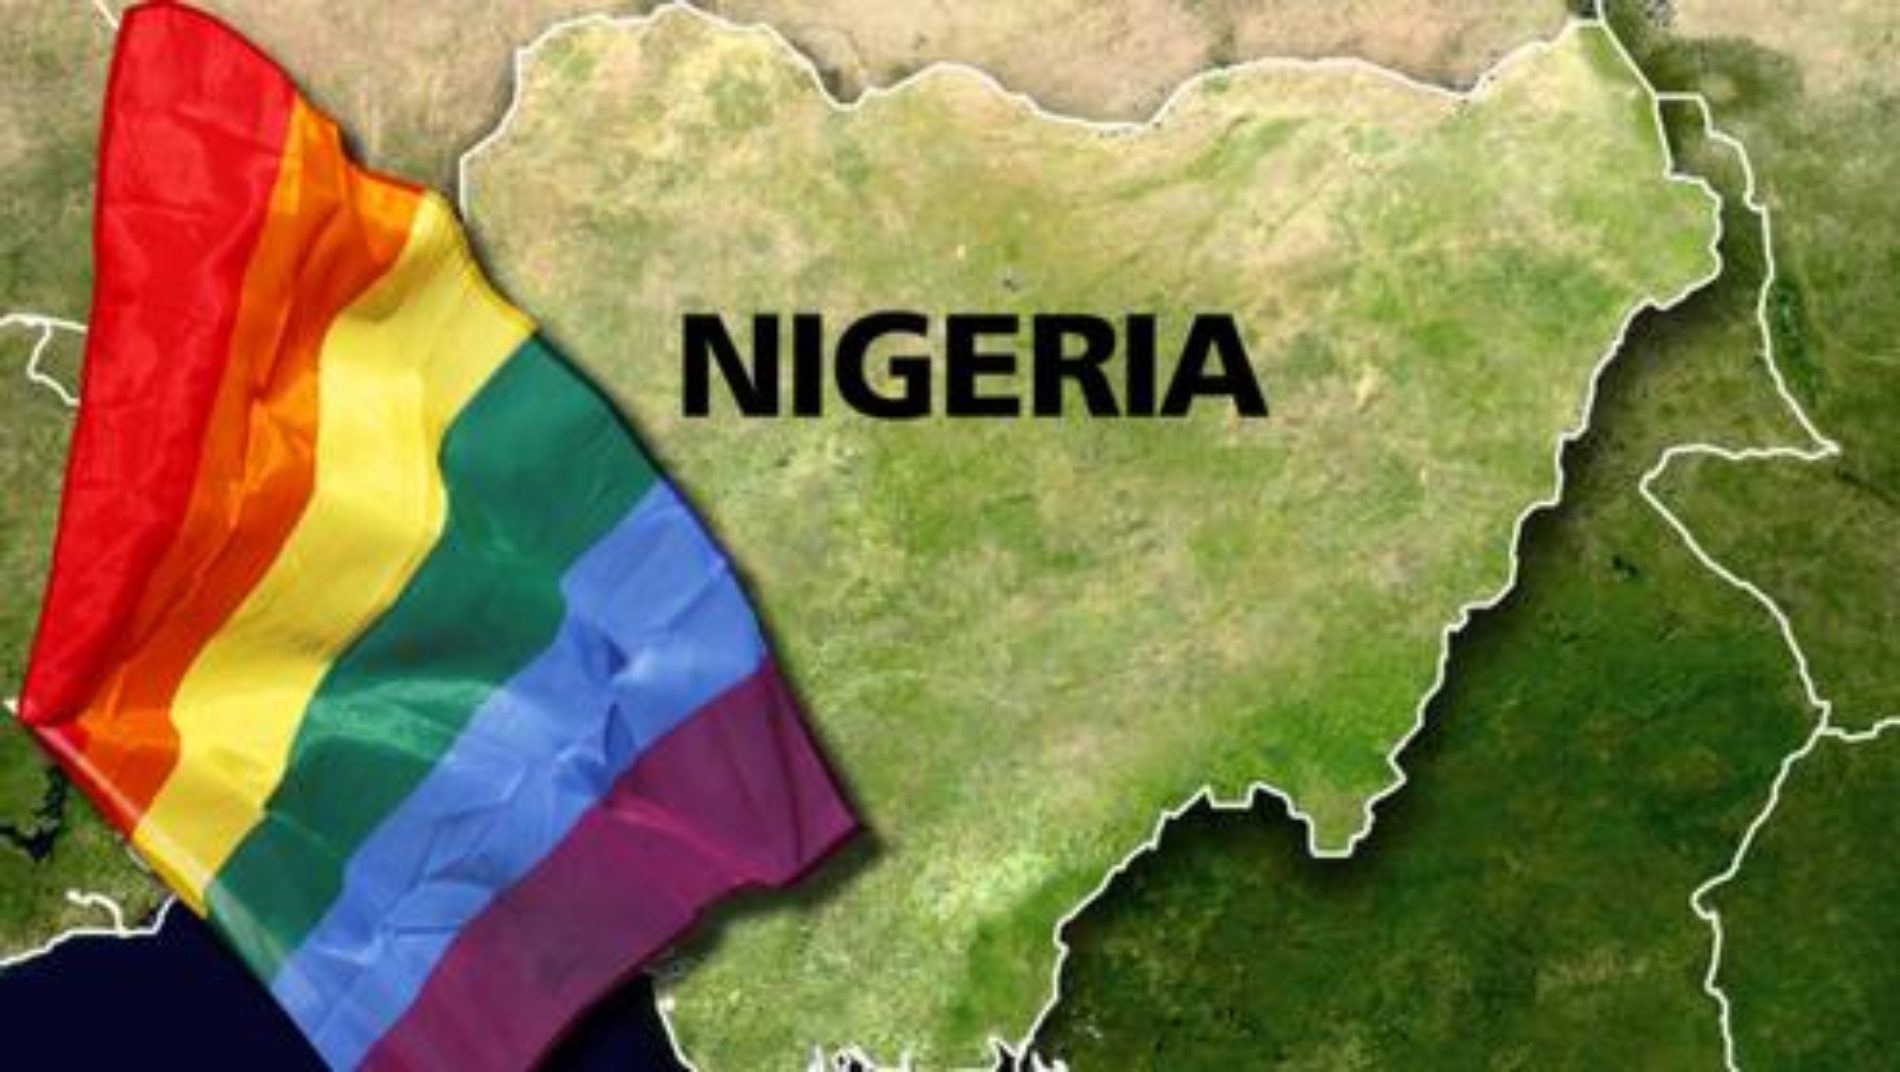 ELECTION YEAR IS COMING UP, AND NIGERIAN POLITICIANS HAVE REMEMBERED HOMOSEXUALITY EXISTS (AGAIN)